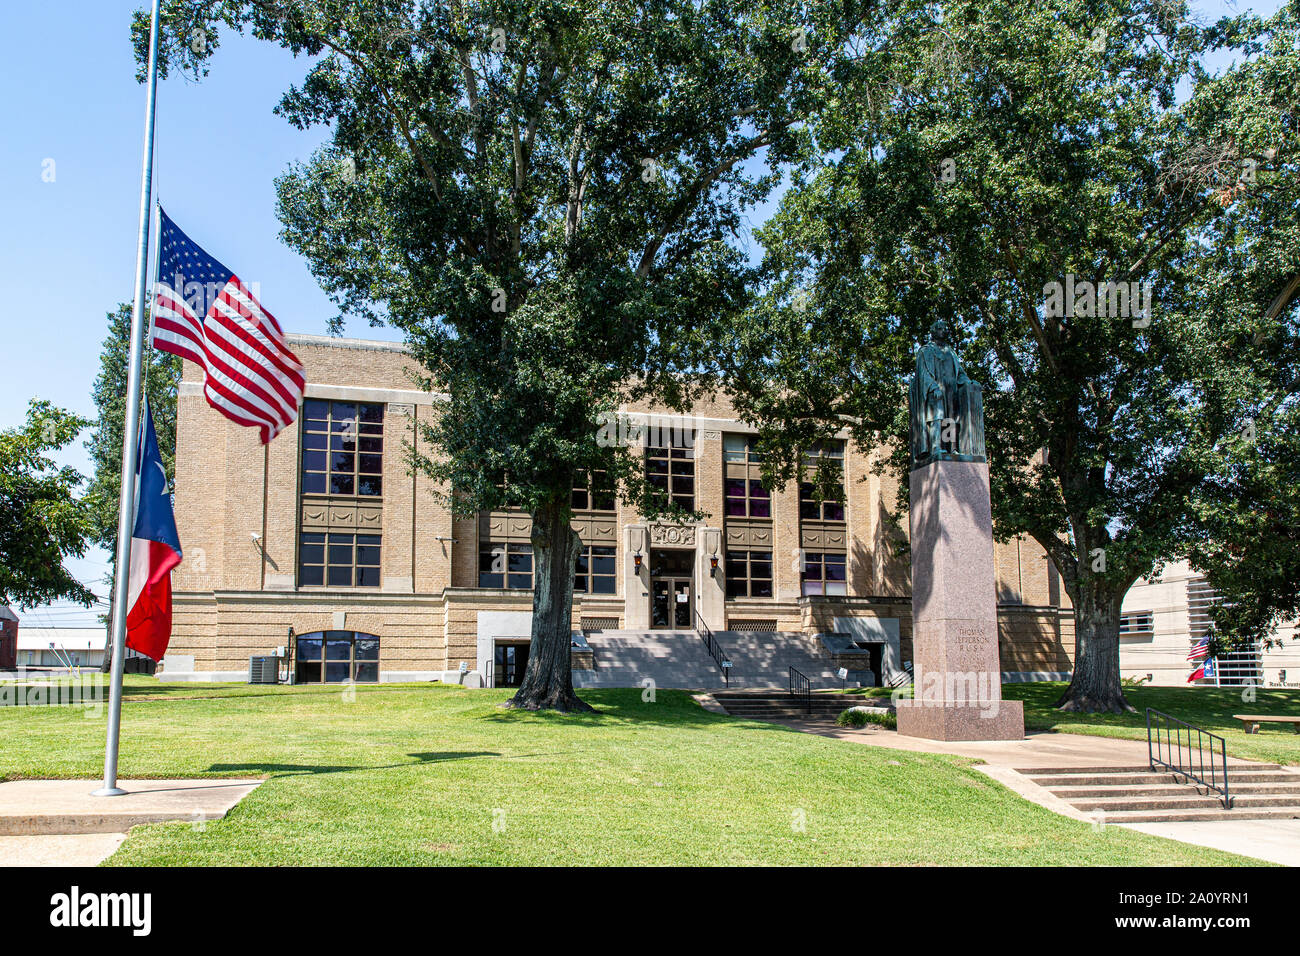 The historic 1885 Cherokee county courthouse in Rusk, Texas which was rennovated in 1928. Stock Photo